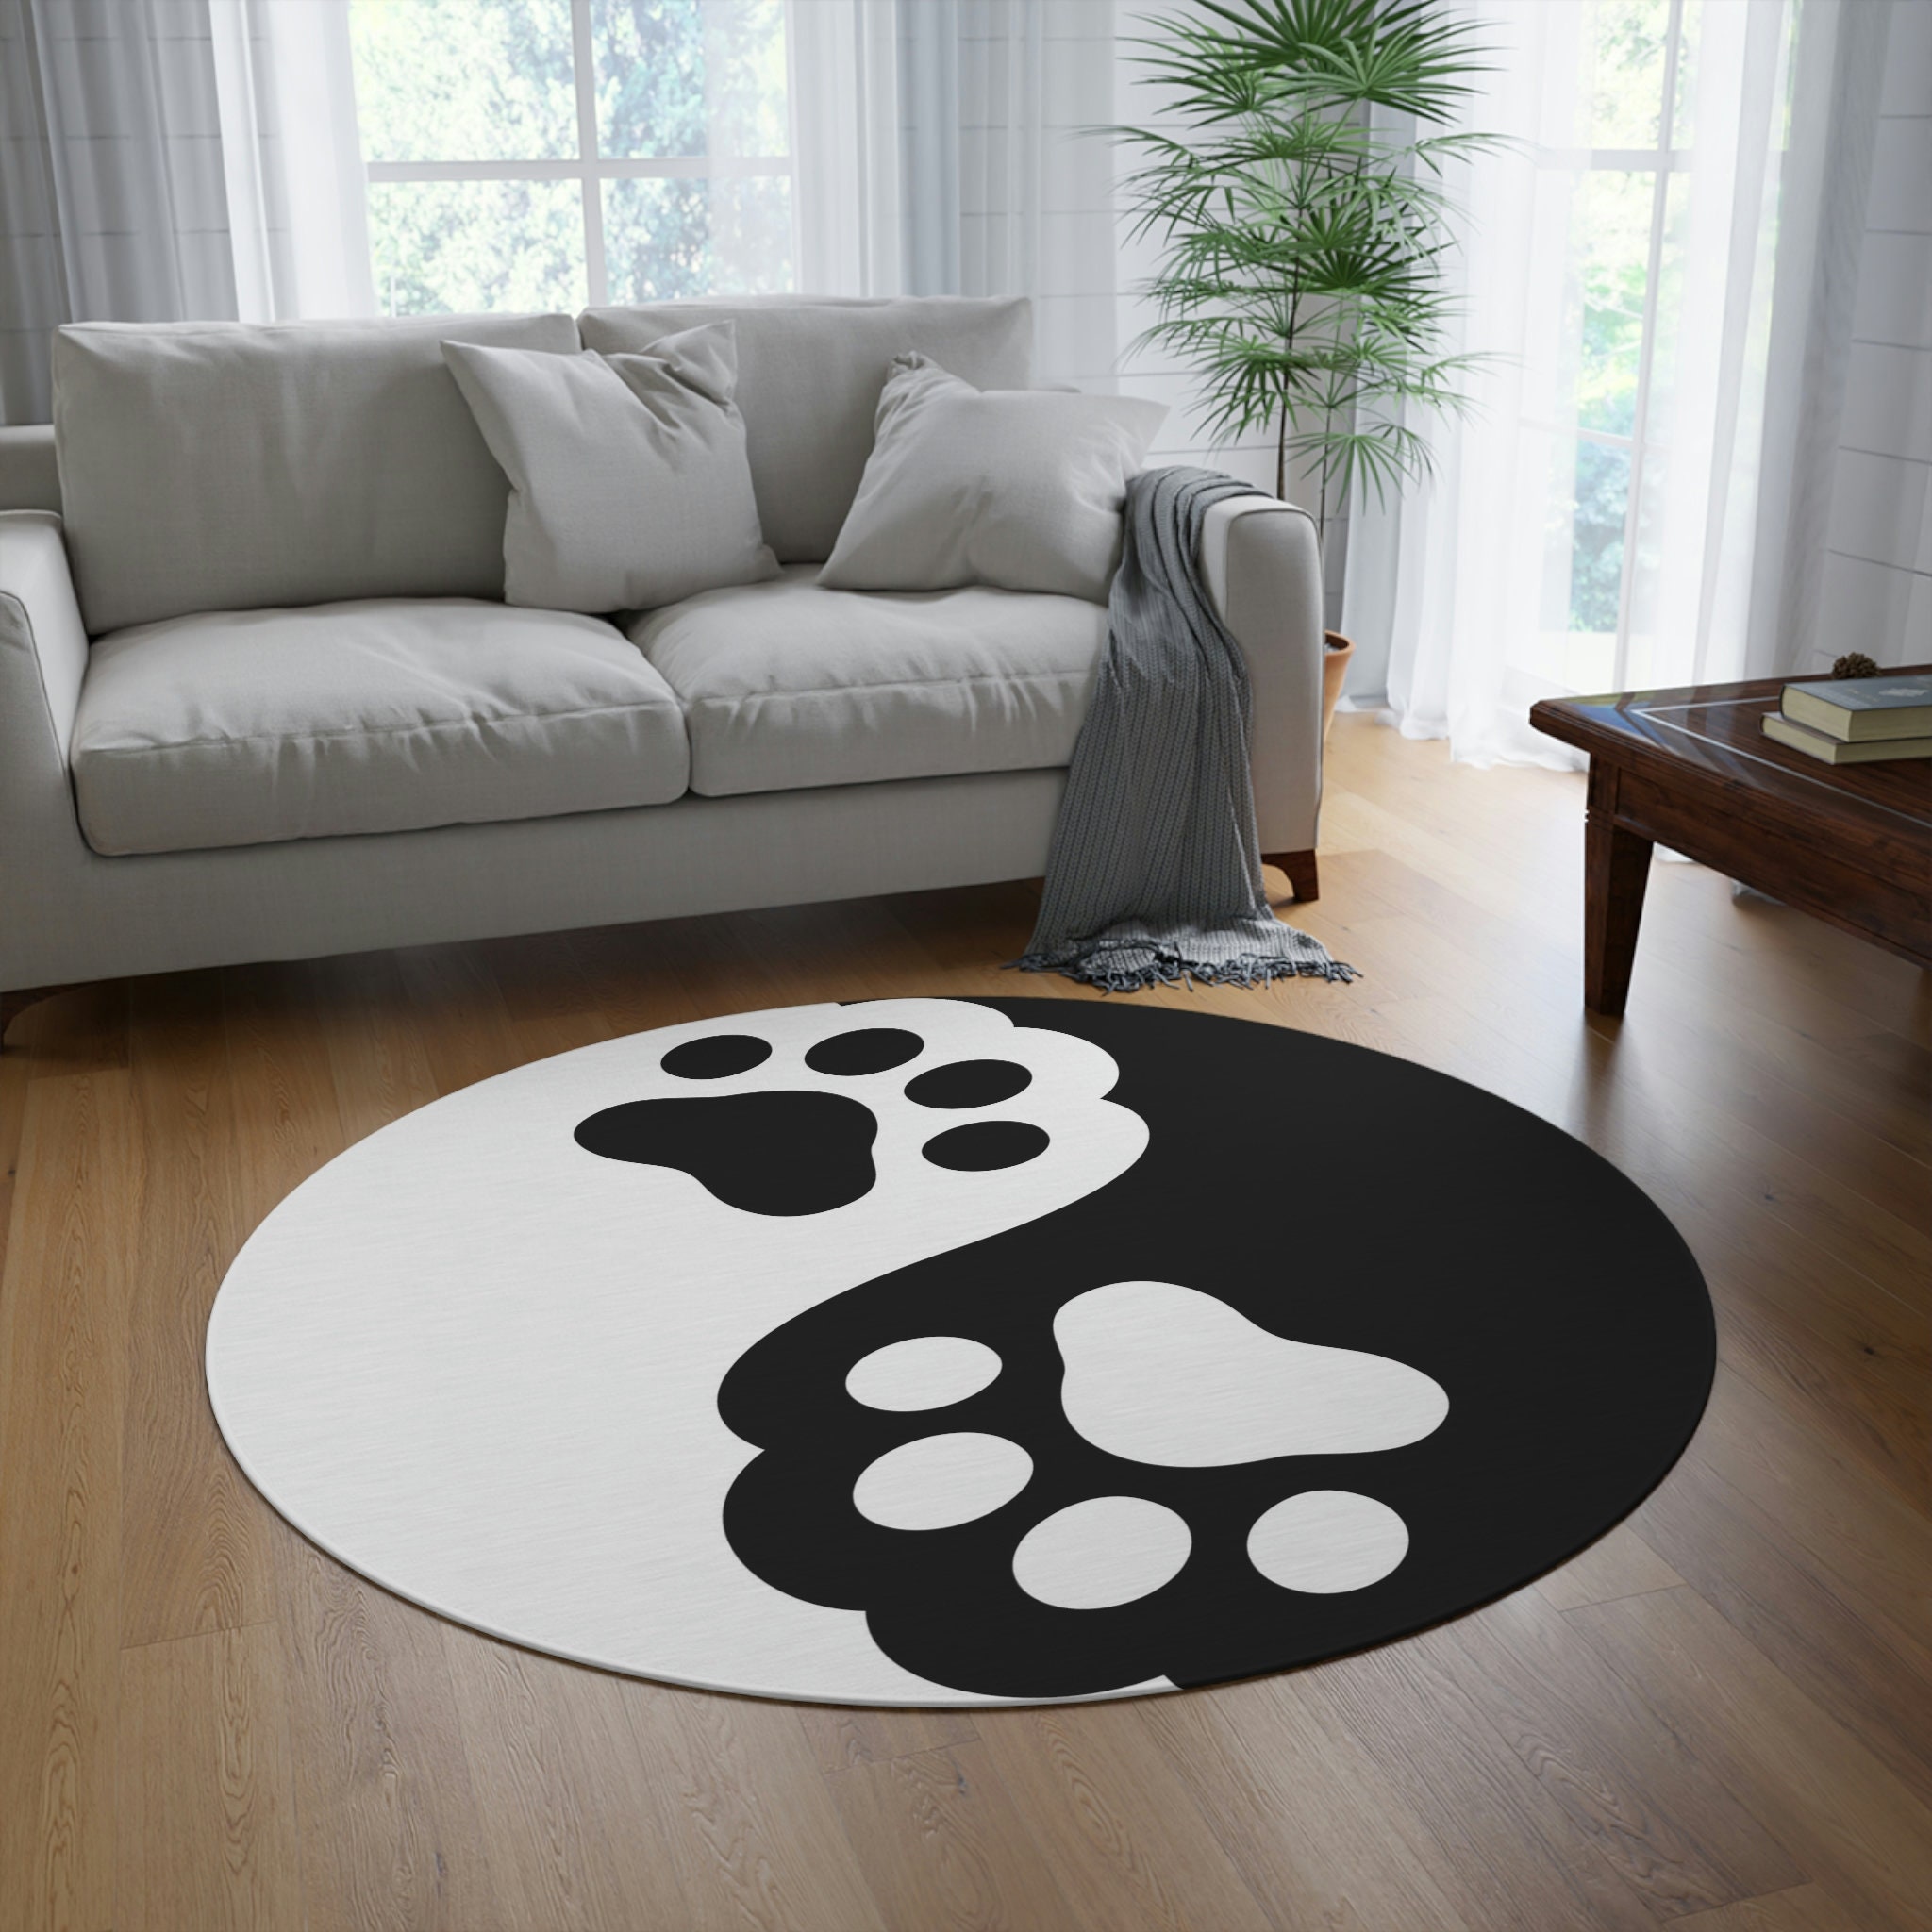 Yin Yang Rug With Animal Paw Design in Black and White Circle Design for  Any Room Floor Decor Carpet Cat or Dog Mom Gift Yin Yang Carpet 